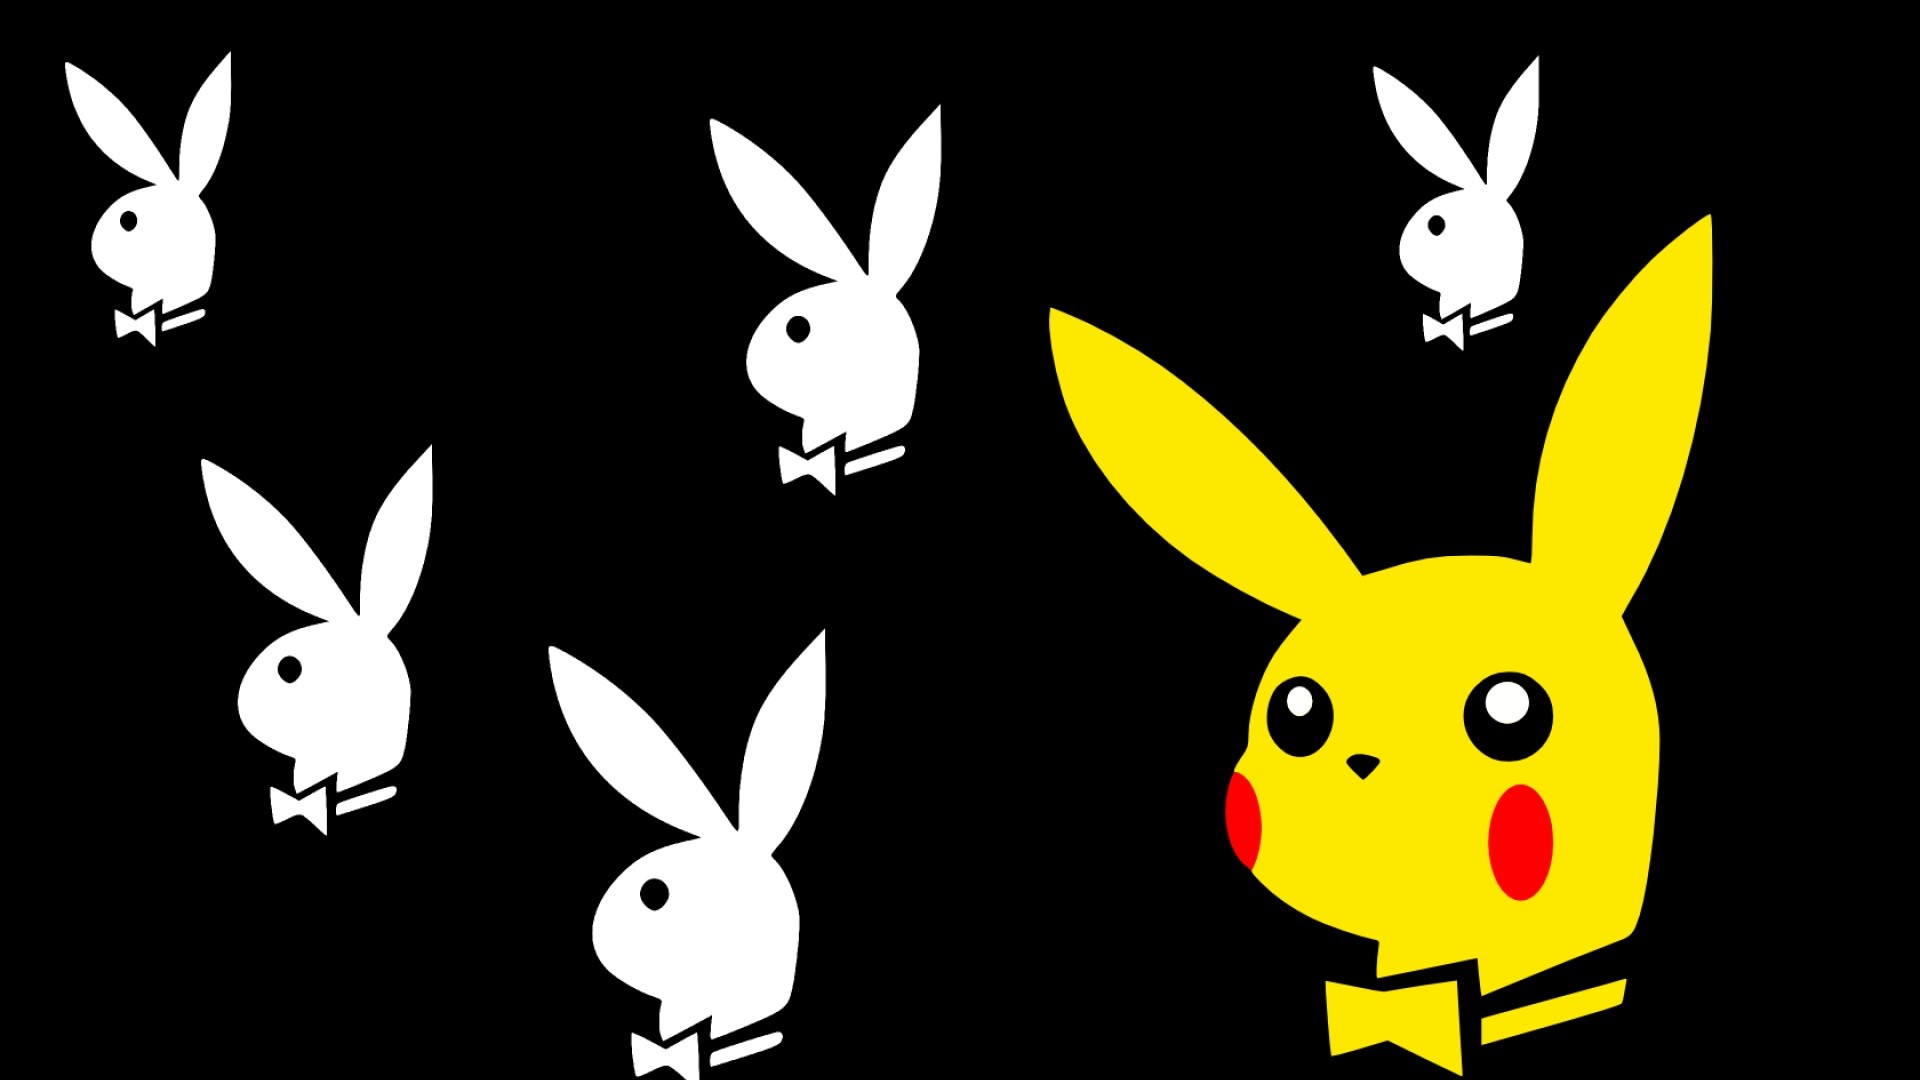 Pikachu Playboy. How to set wallpaper on your desktop Click the download link from above and set the wallpaper on the desktop from your OS